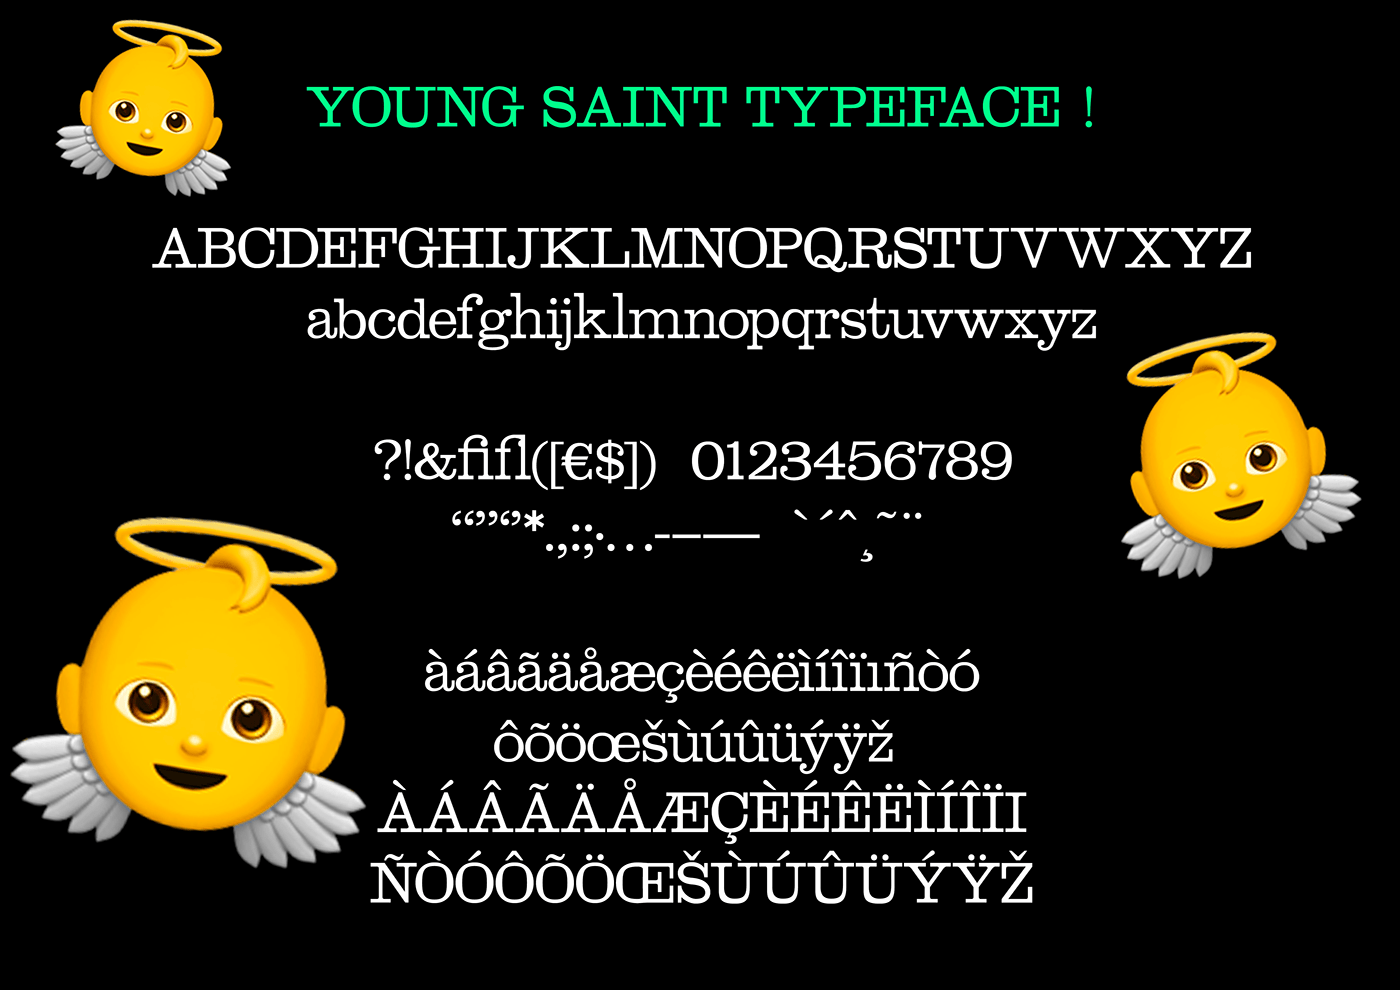 Typeface typography   font type glyphs grahic design Typographie mise en page Layout young saint